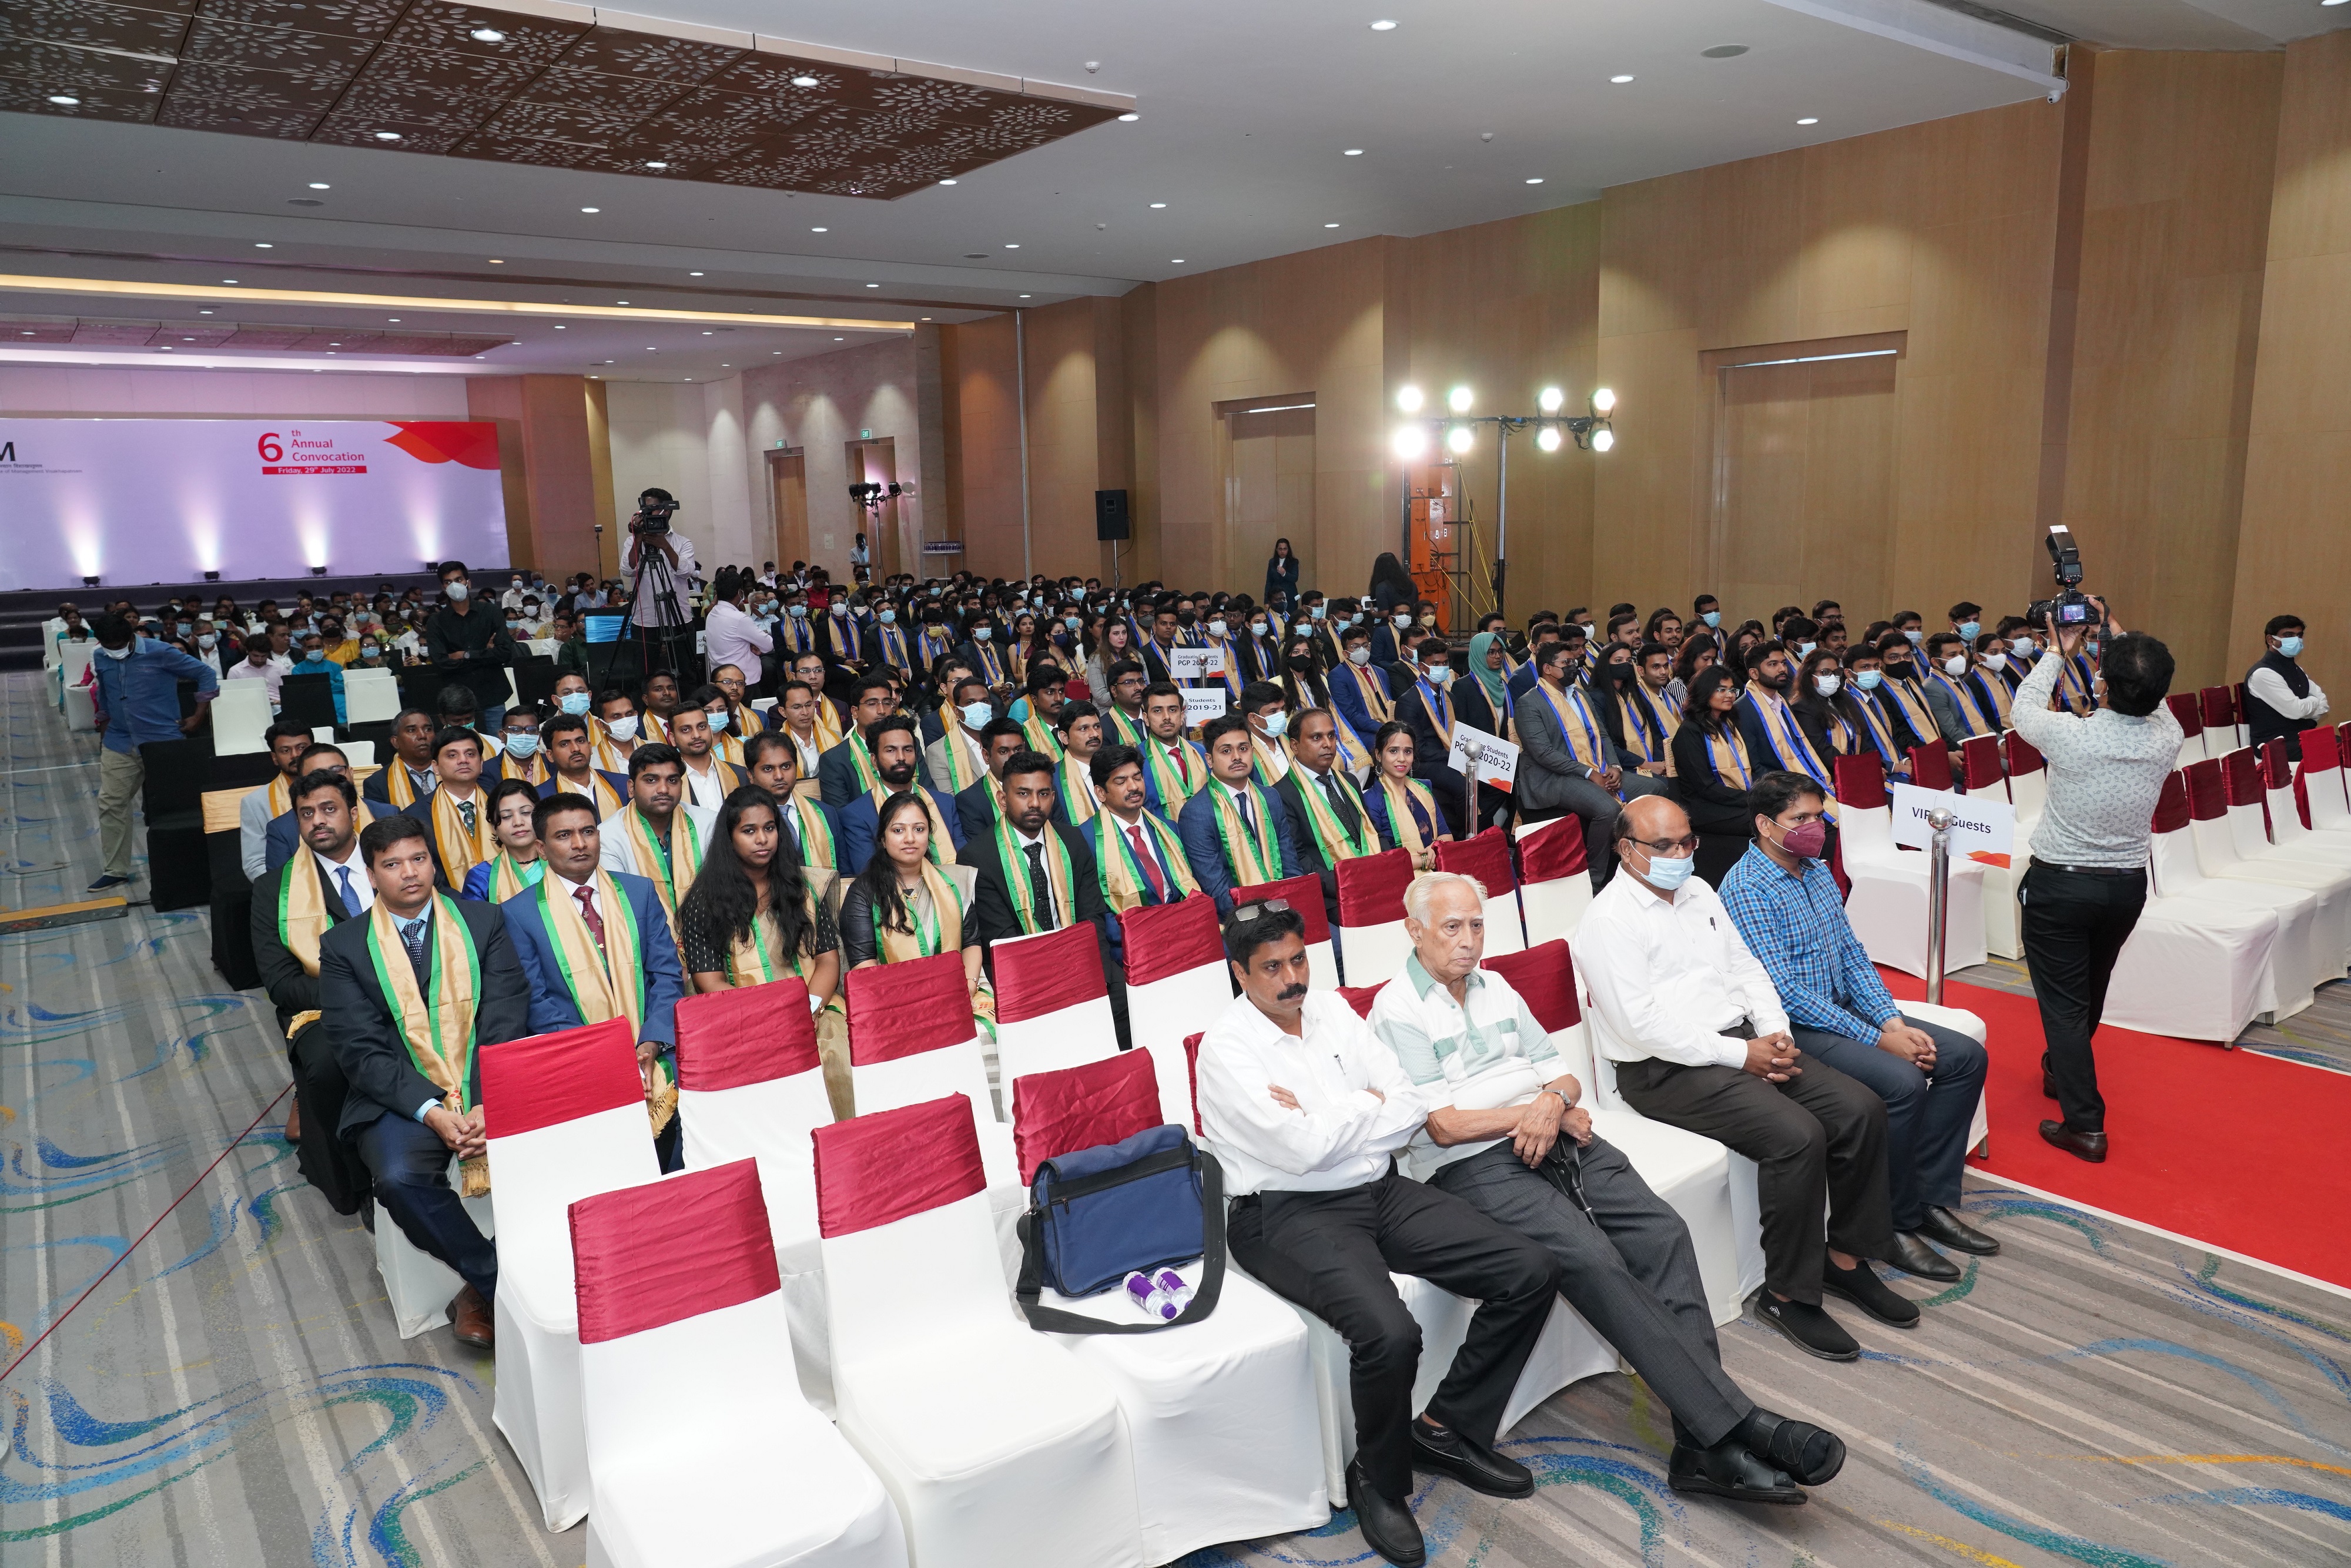 IIMV hosts its 6th Annual Convocation - 29.07.2022